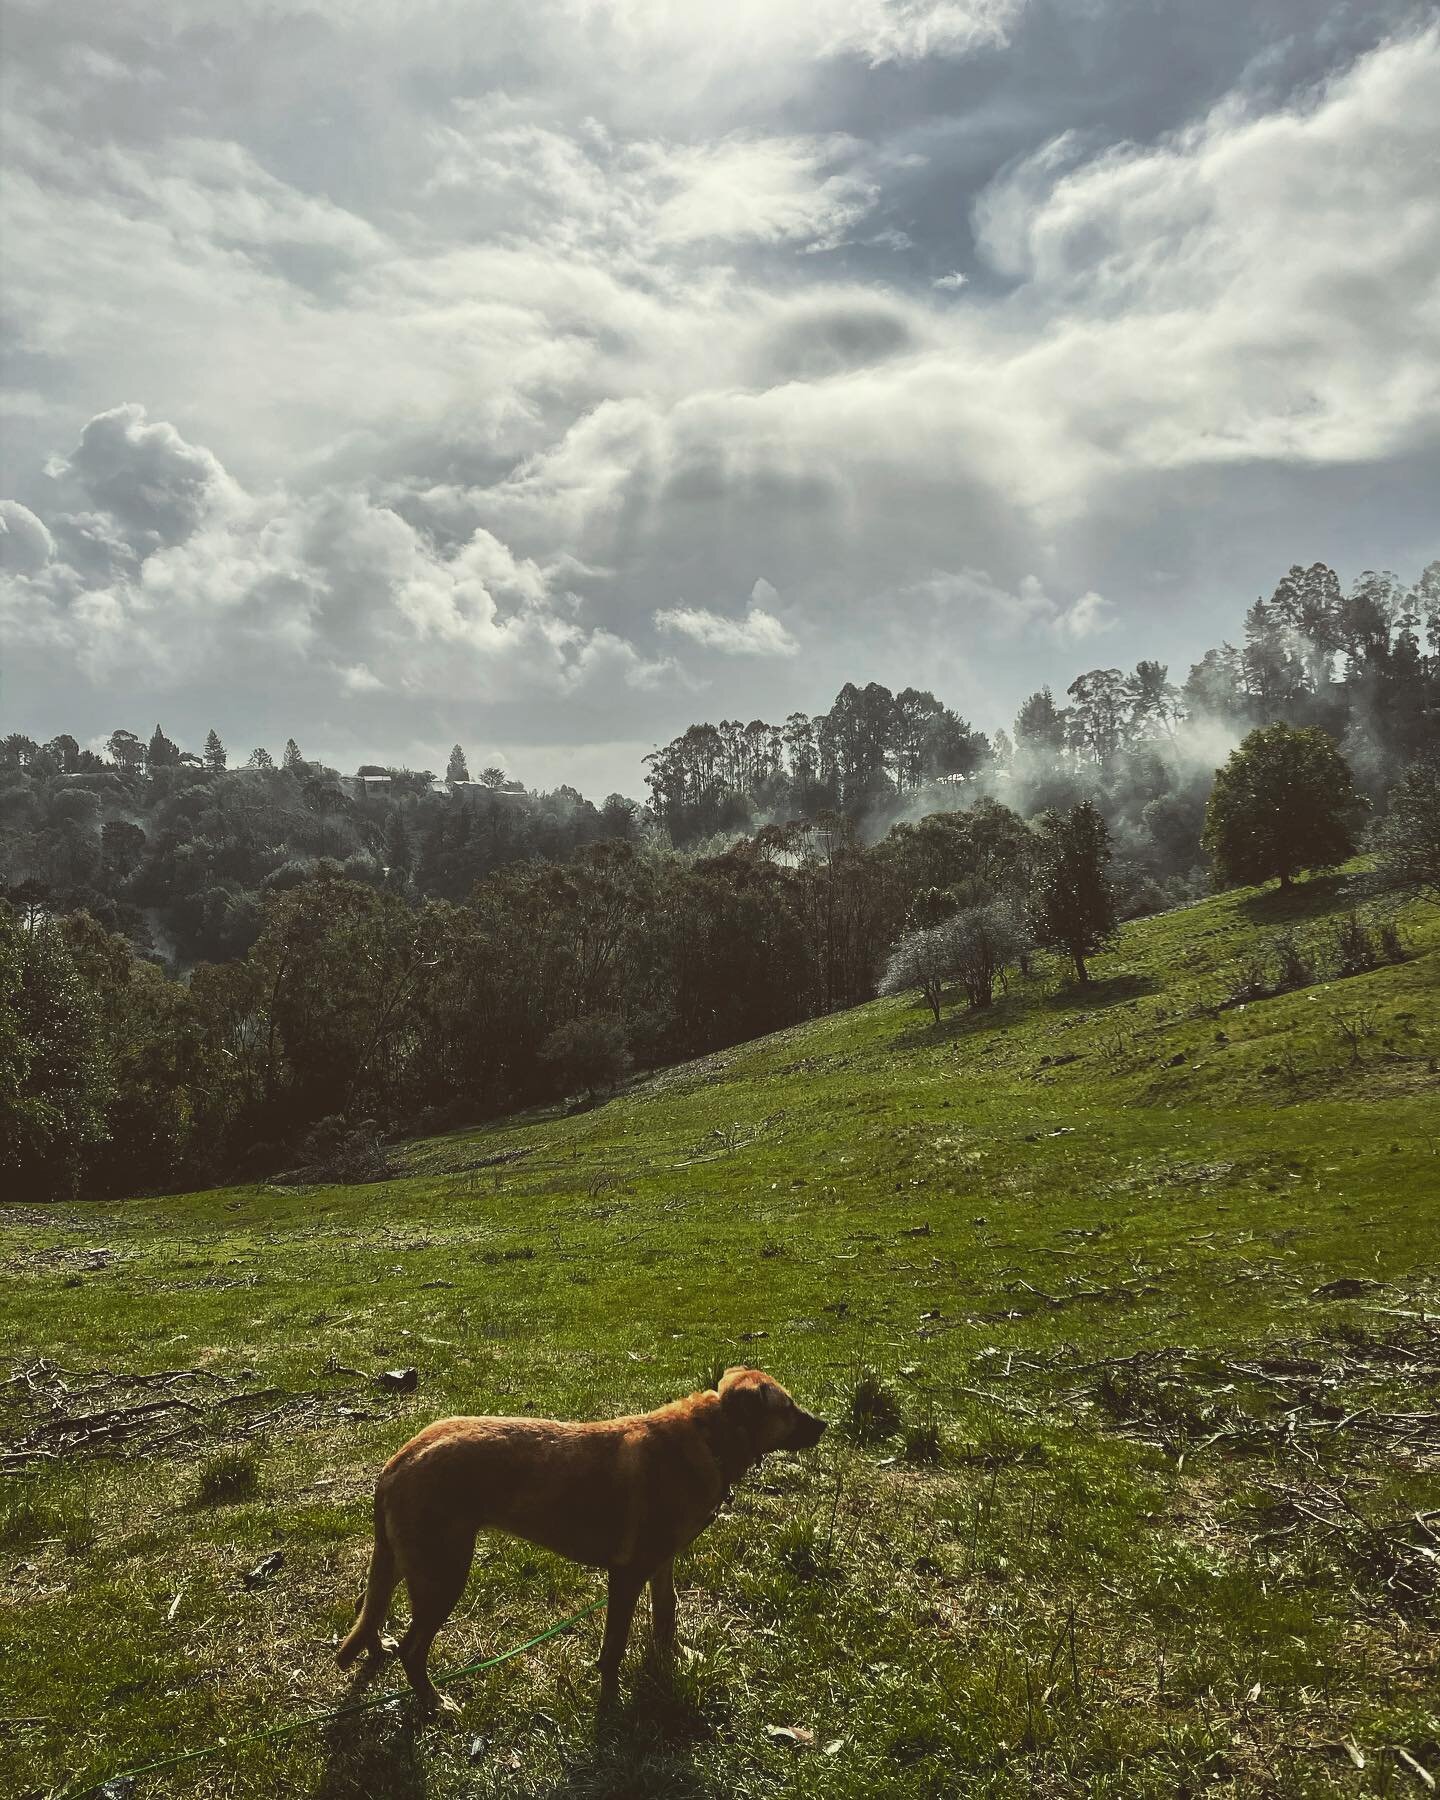 Thankful for this moment of sun after a hike in the rain and hail! #dirtydog #dirtydoghikes #ebrp #ebrpd #dogwalking #dogwalkers #offleash #doghikes #doghiking #oaklanddog #oaklanddogs #oaklanddogwalking
#oaklanddogwalker #puppro #doggo #doggos #pupp